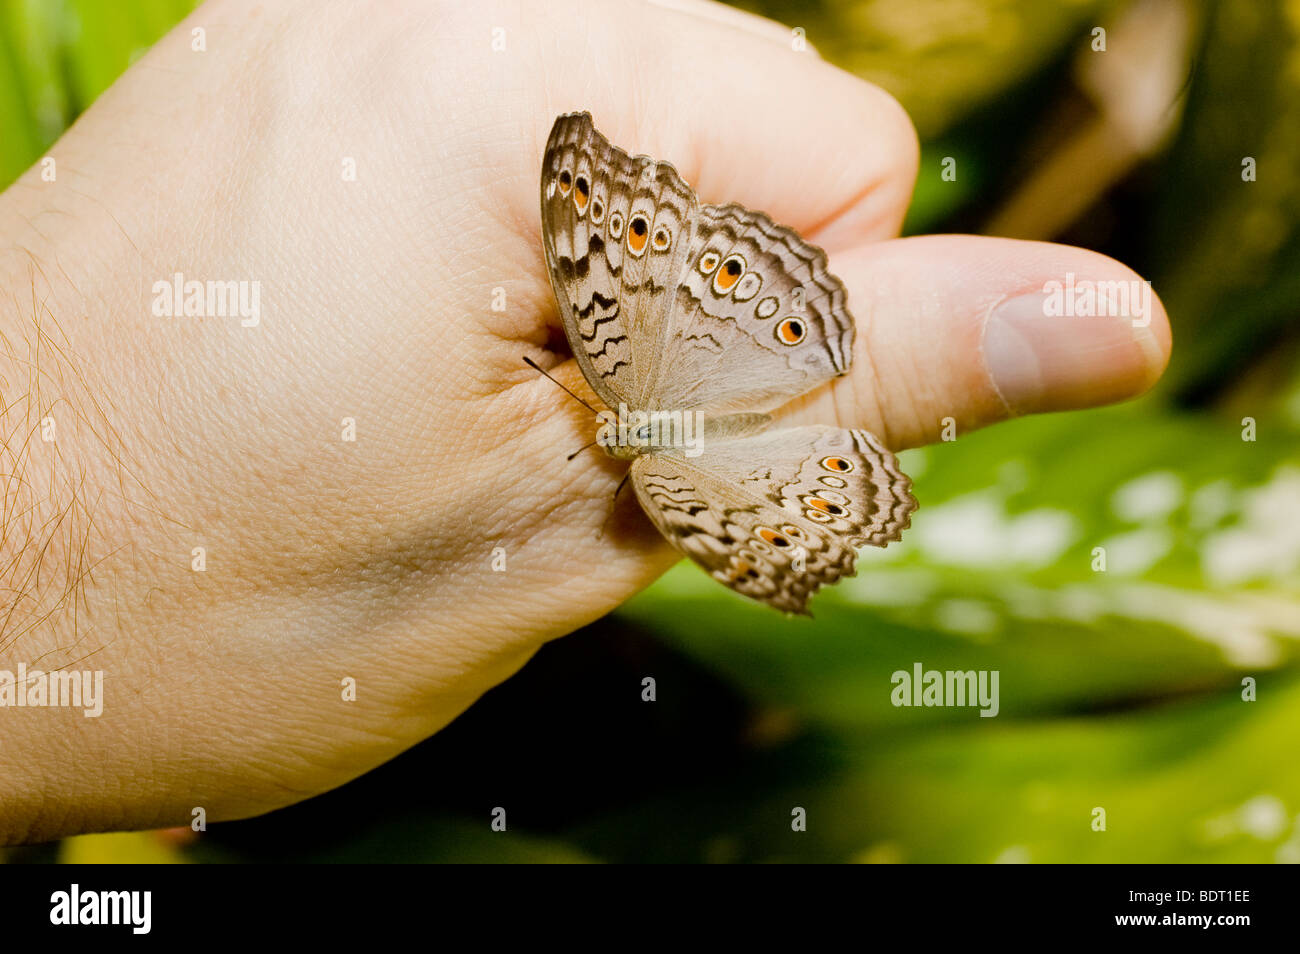 Butterfly on a human hand with the thumb Stock Photo